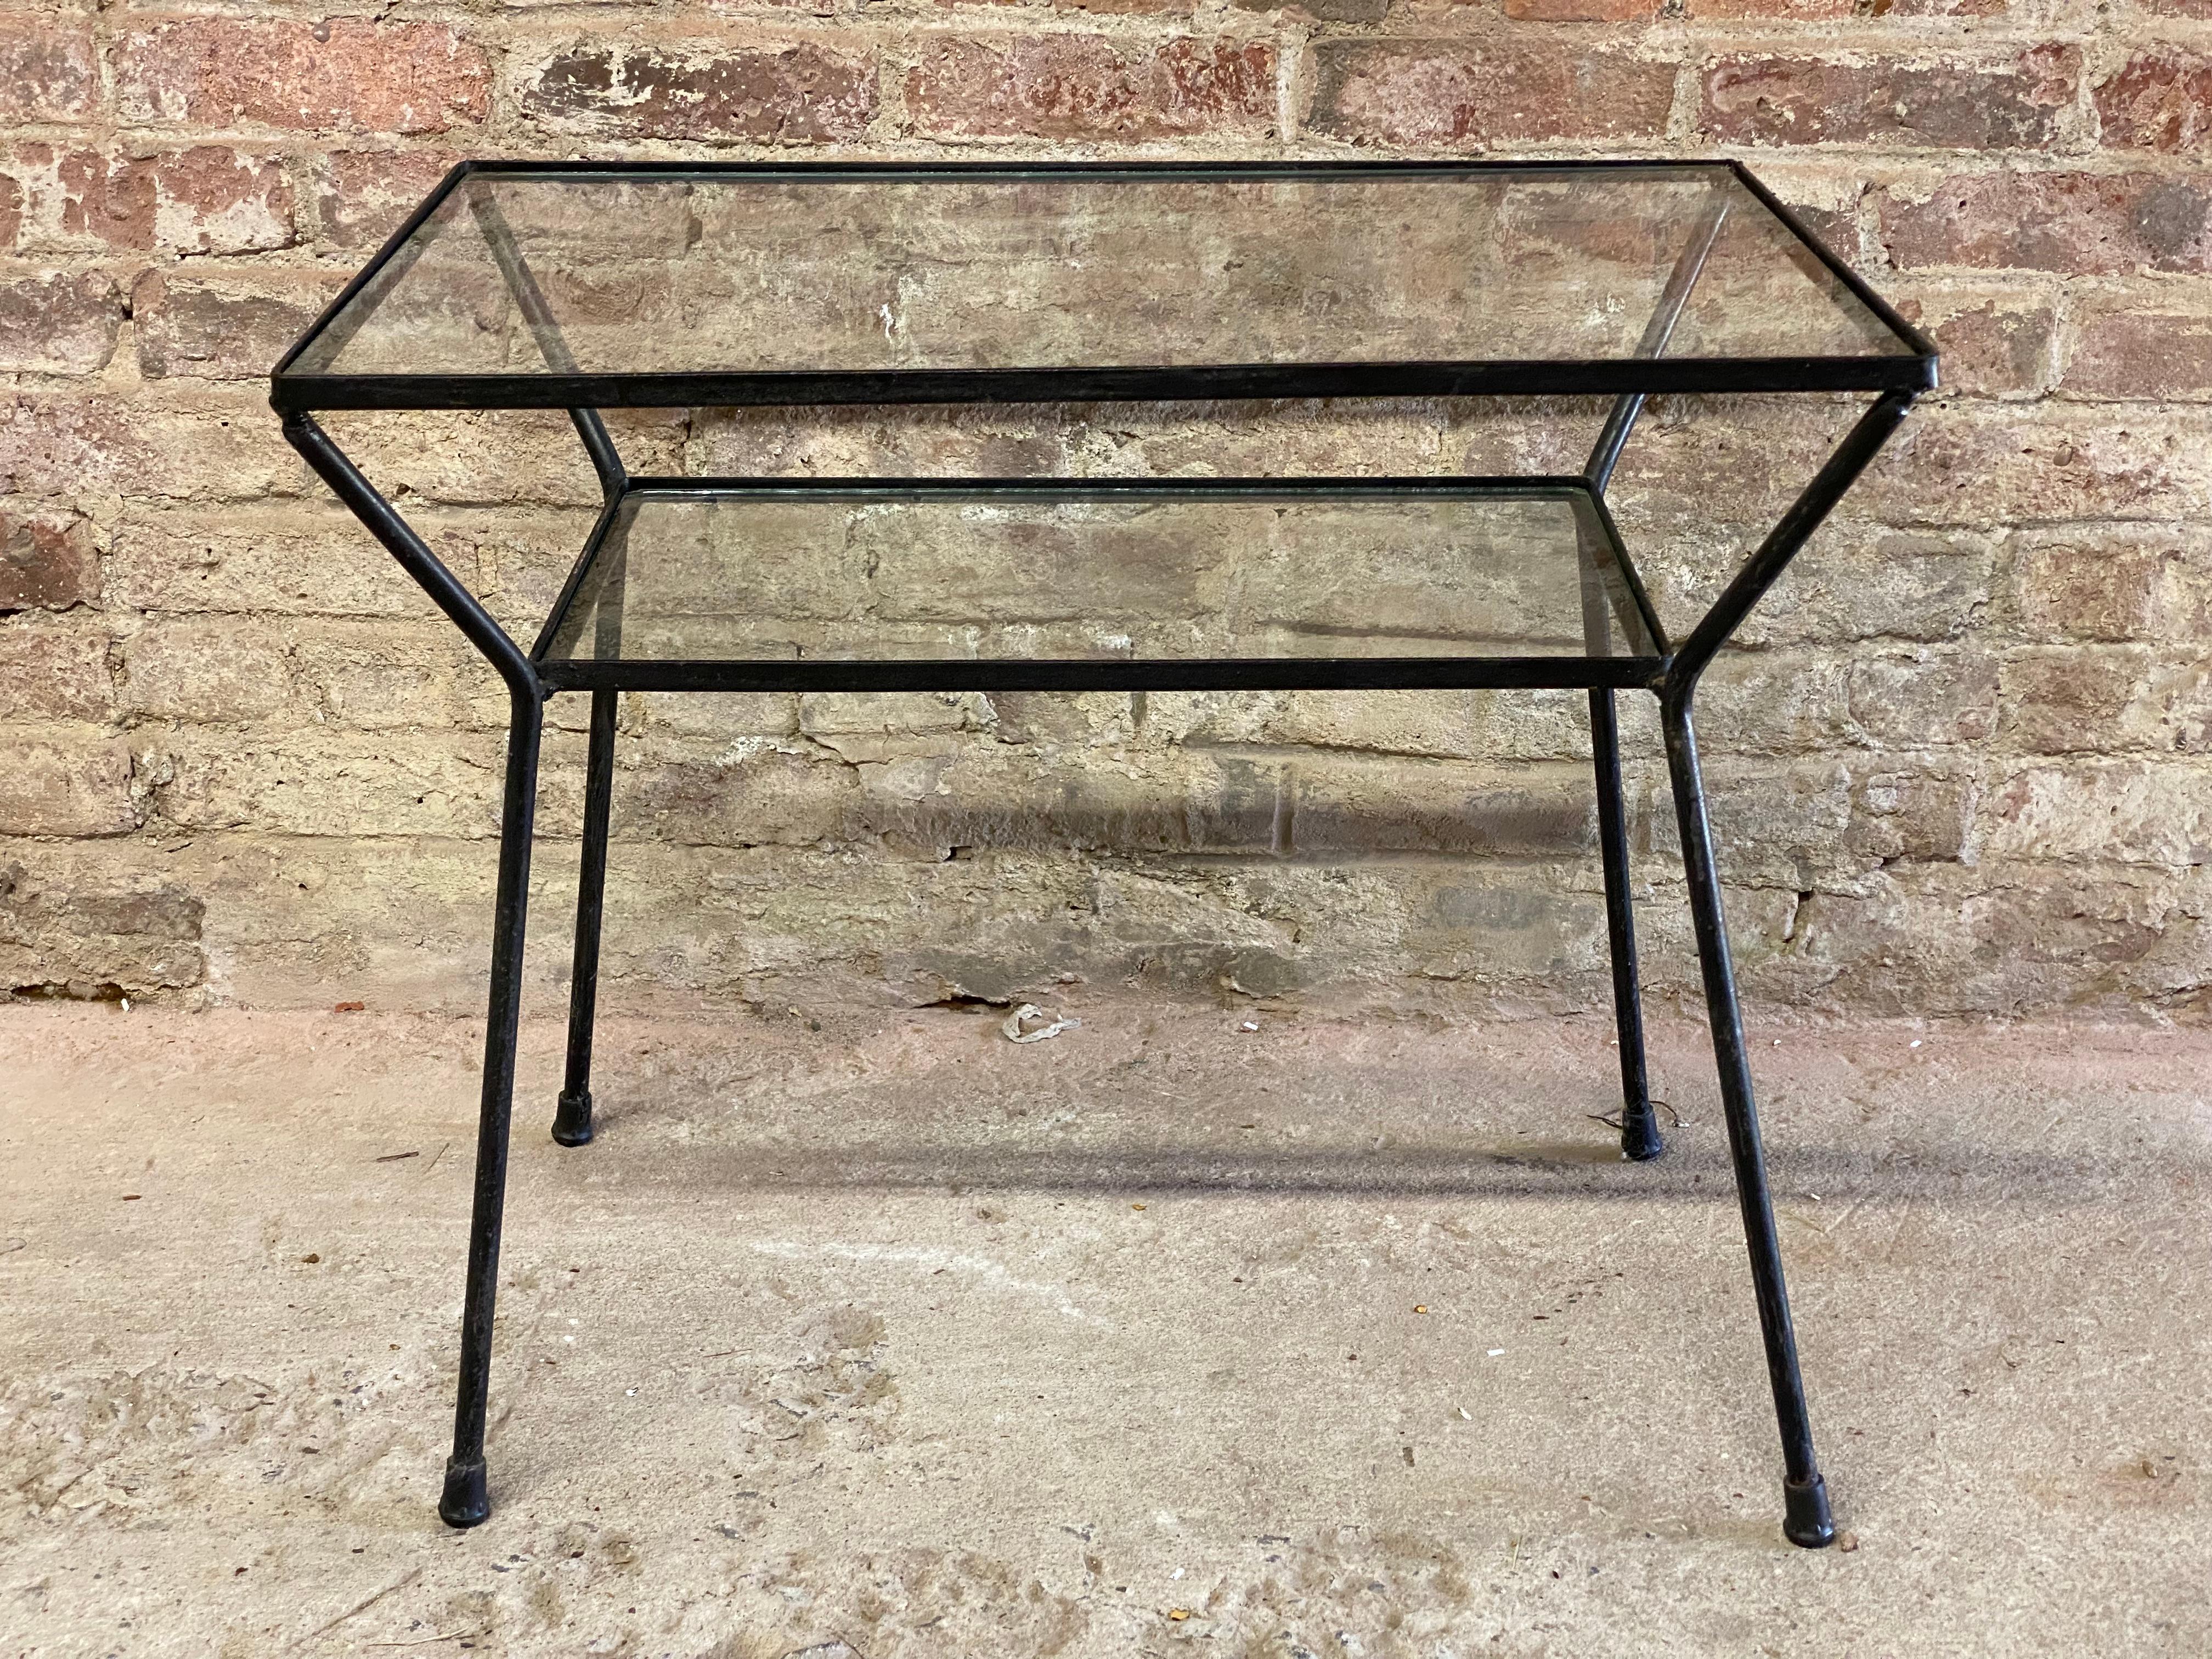 Iron frame and glass top table reminiscent of Milo Baughman for Pacific Iron Works. Featuring two glass tops with a nice flared leg frame. A nice accent table that can go just about anywhere. Circa 1950-60. Good overall condition. The glass has been